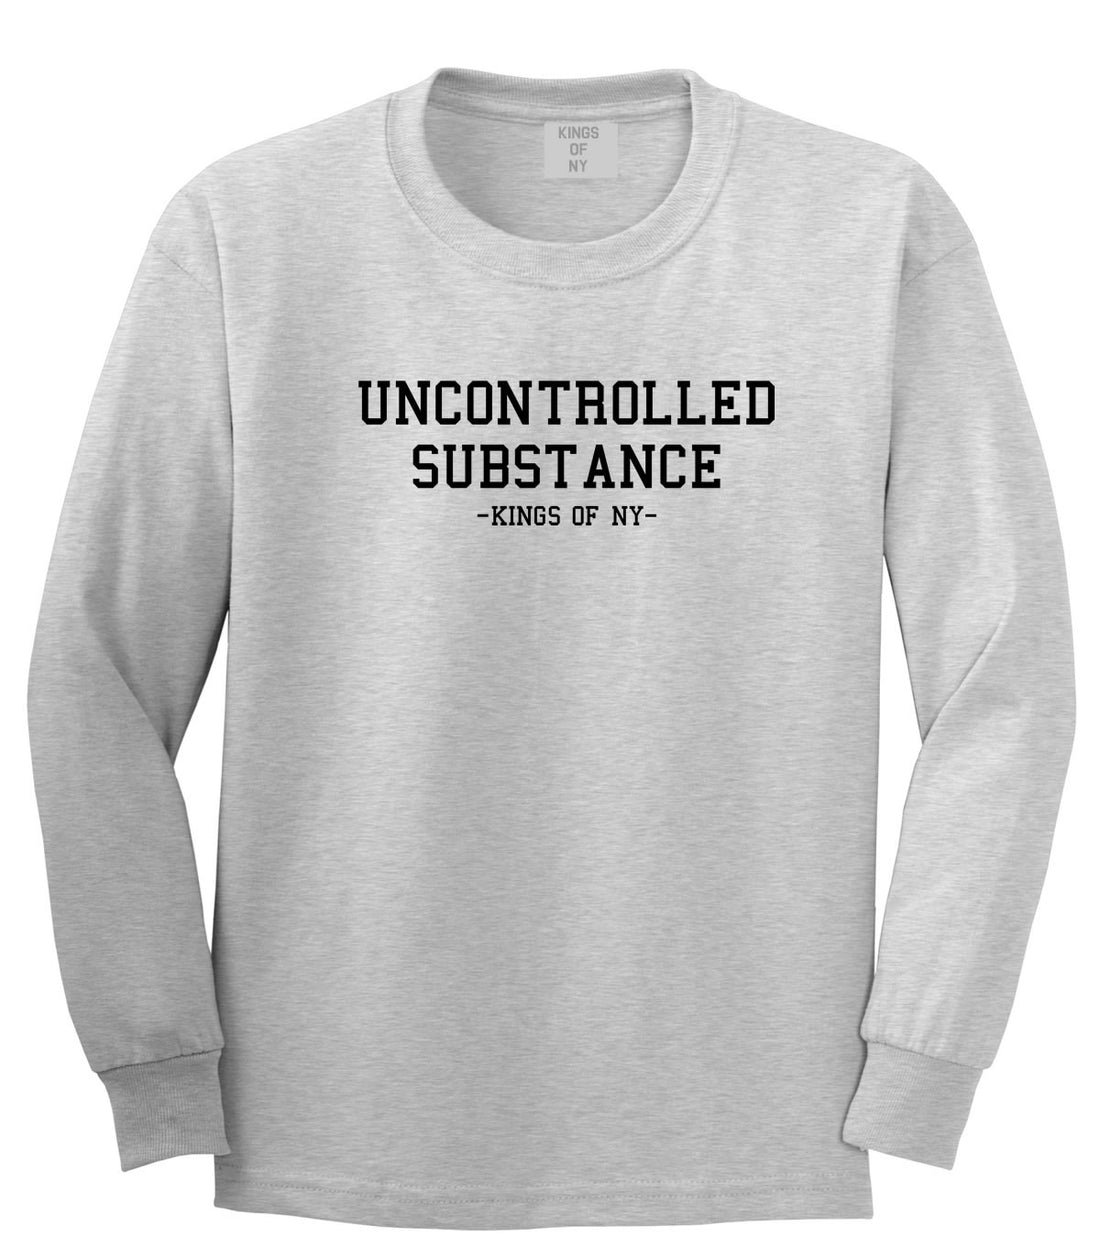 Uncontrolled Substance Long Sleeve T-Shirt in Grey by Kings Of NY